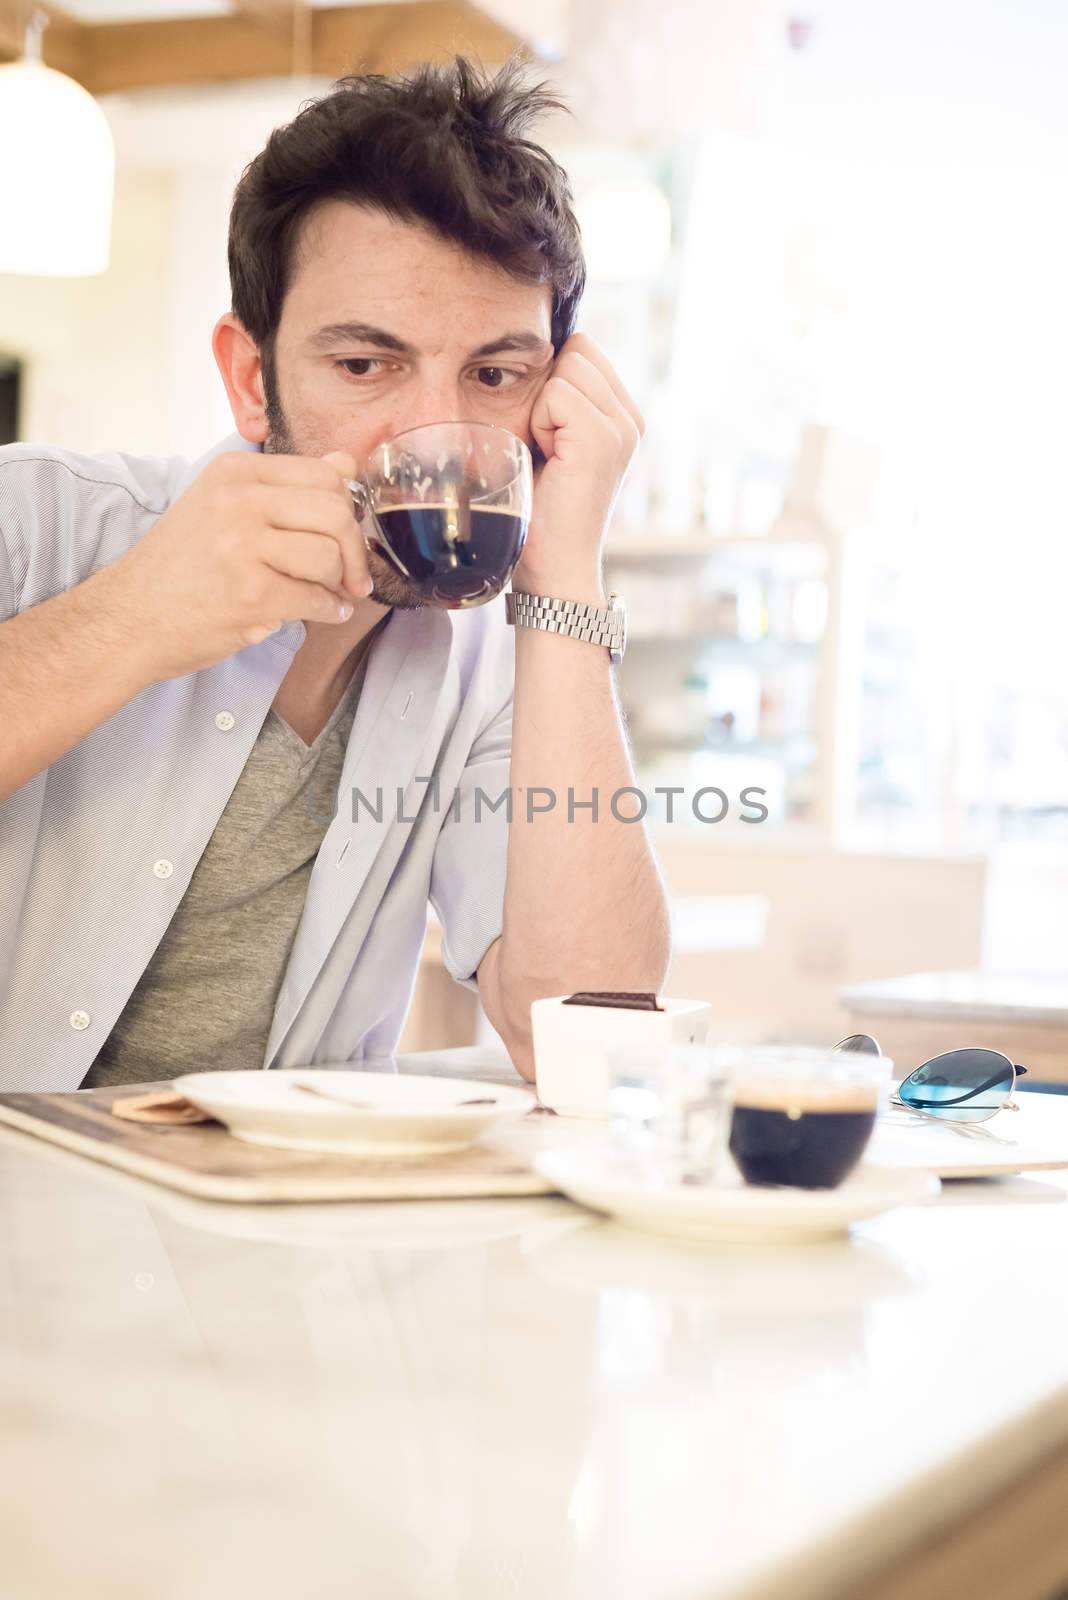 man at the bar drinking coffee by peus